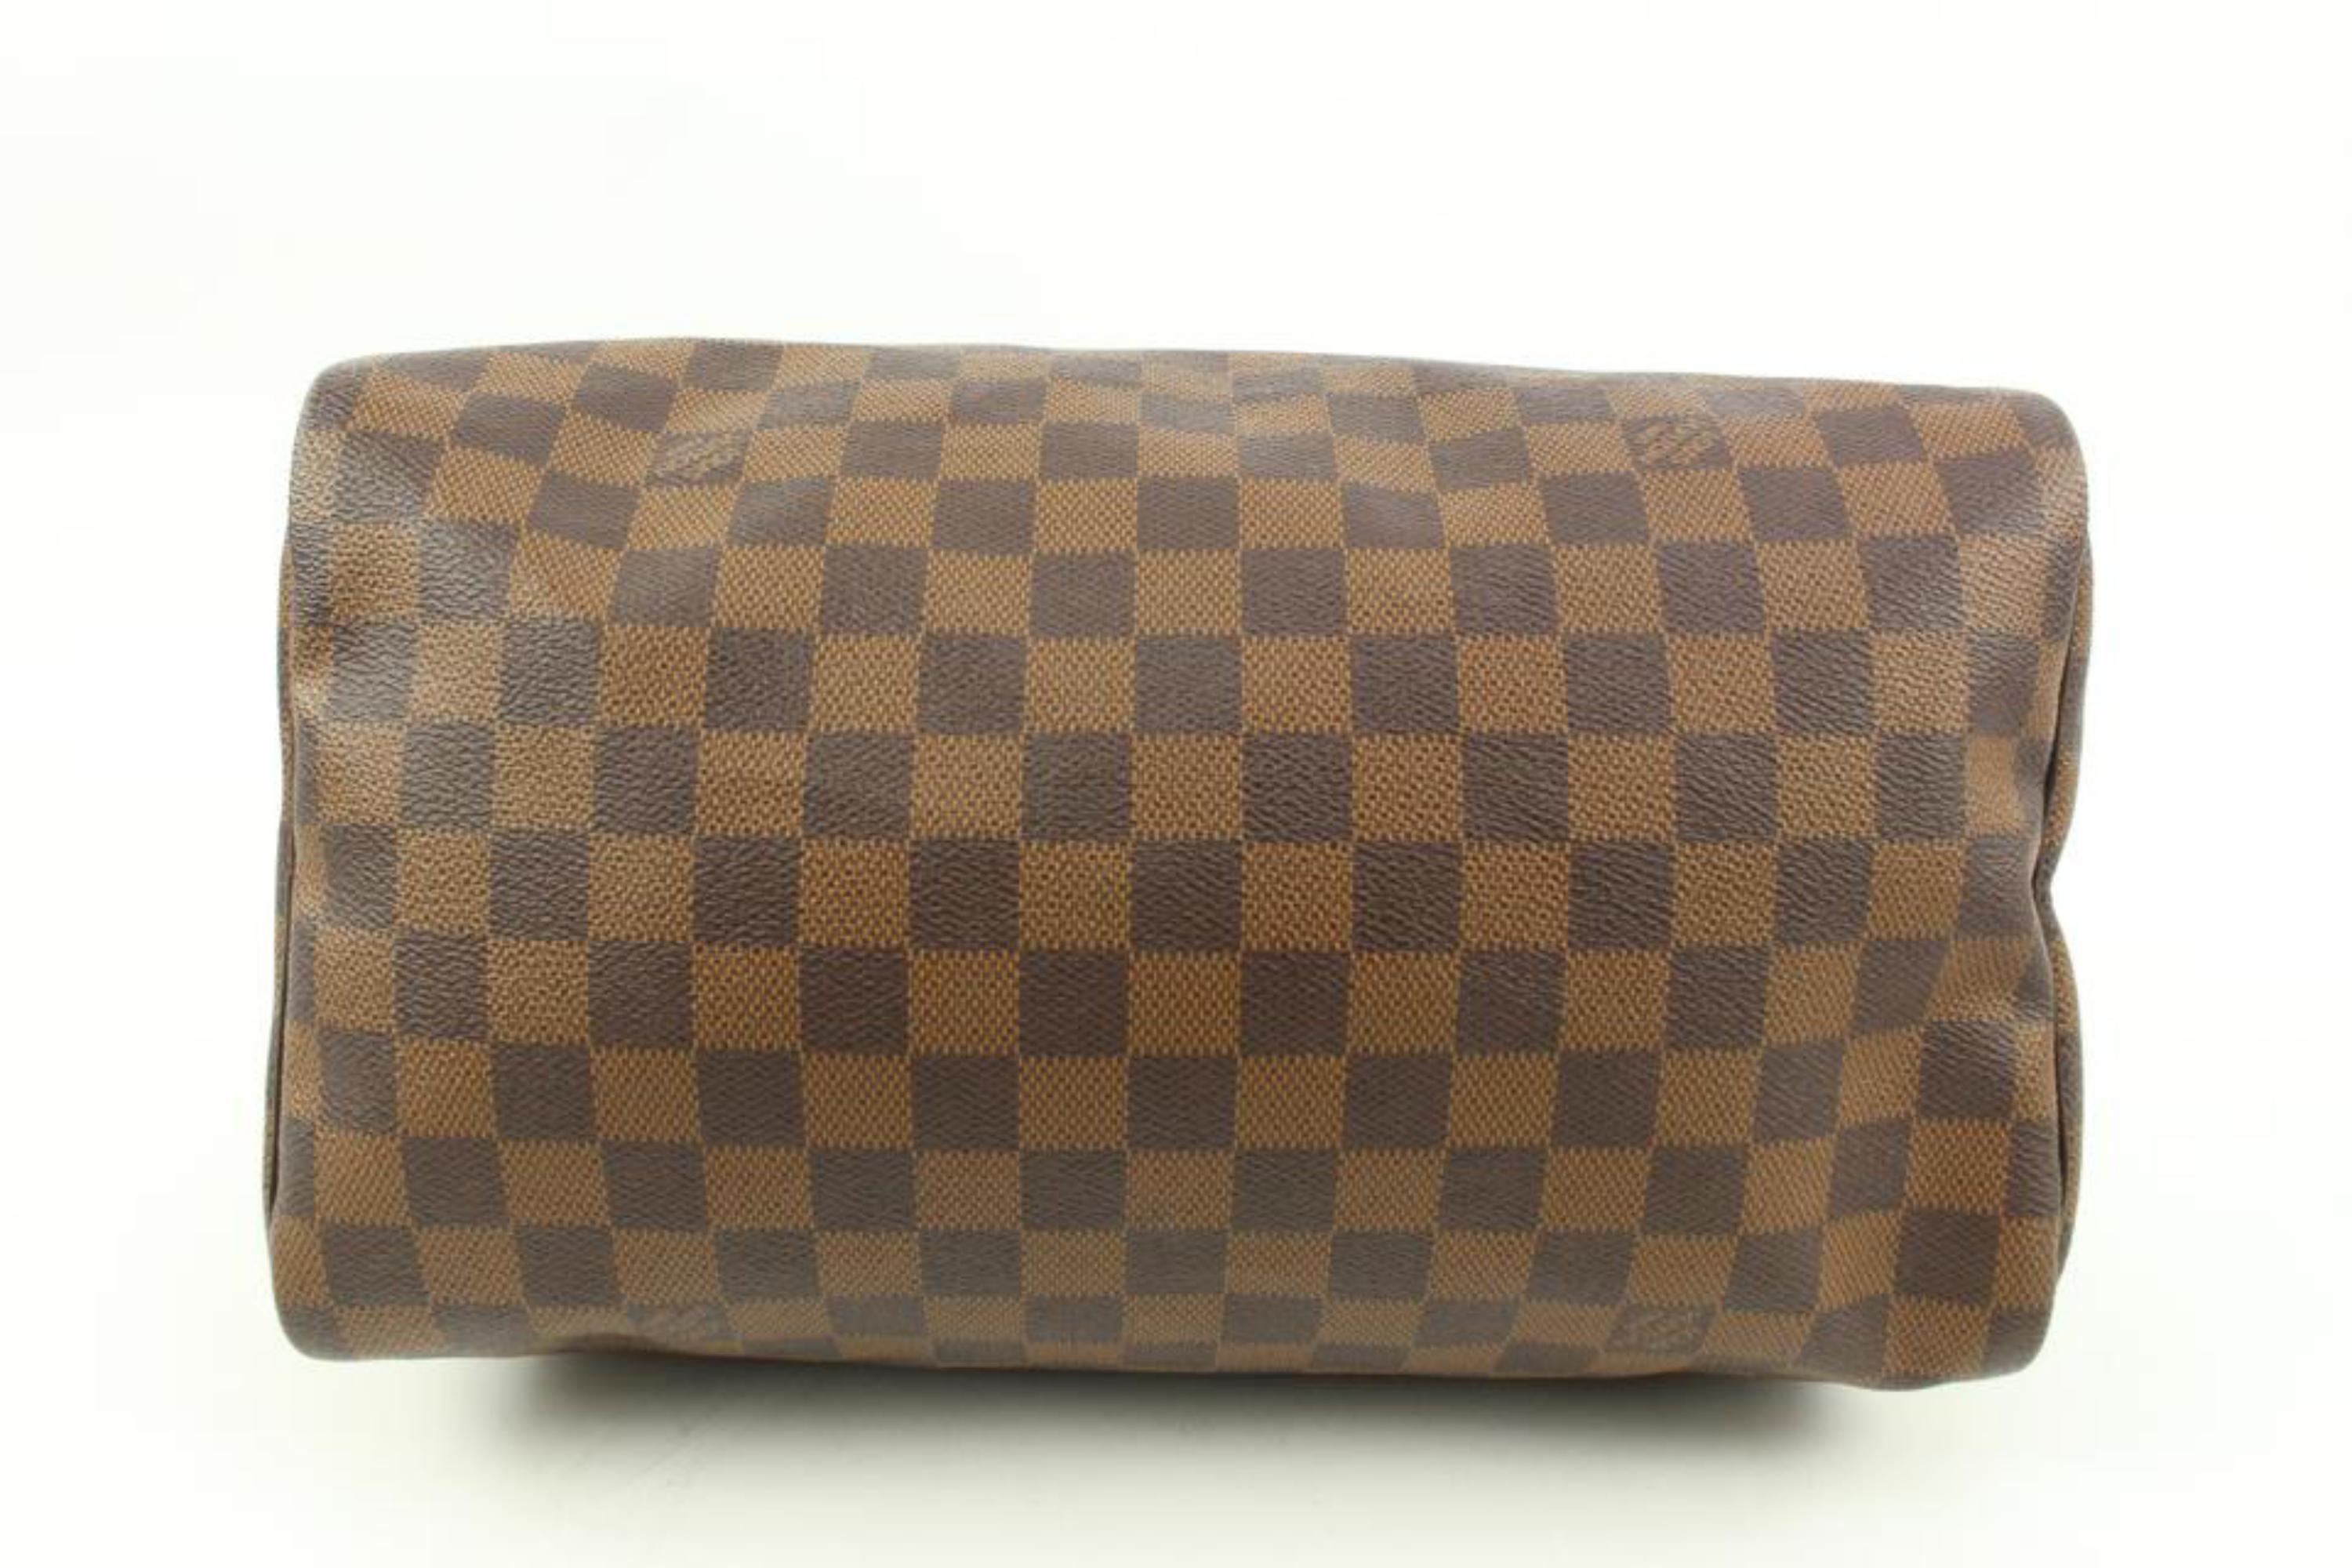 Louis Vuitton Damier Ebene Speedy 30 Boston 81lv225s In Good Condition For Sale In Dix hills, NY